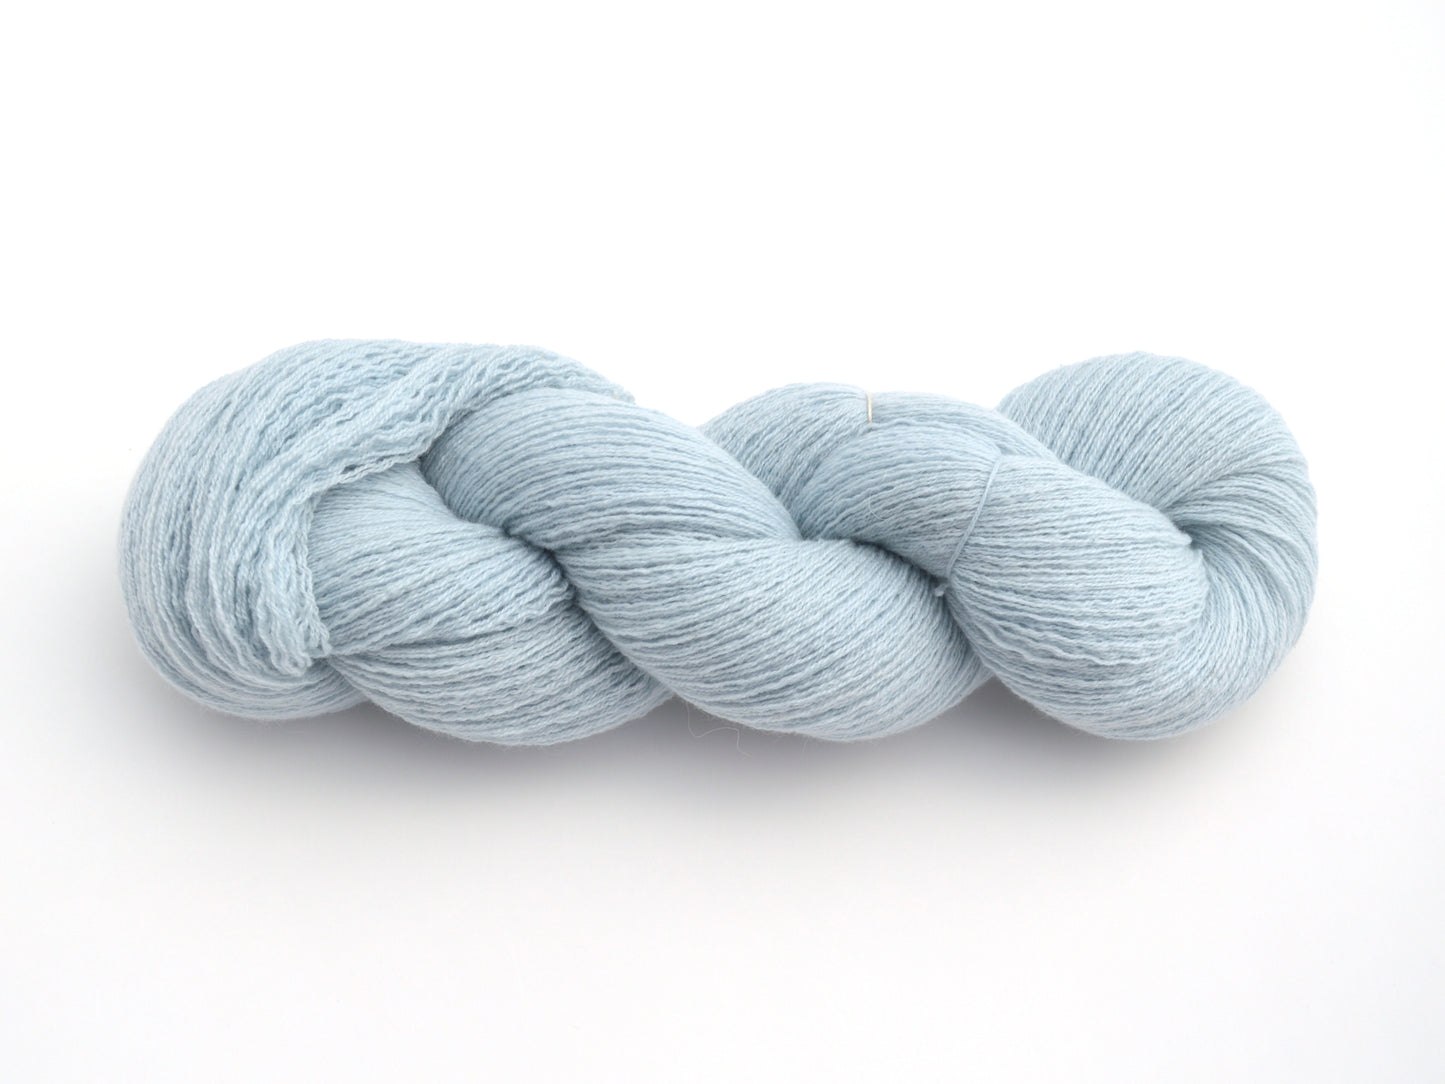 Heavy Lace Weight Recycled Cashmere Yarn in Pale Blue Gray